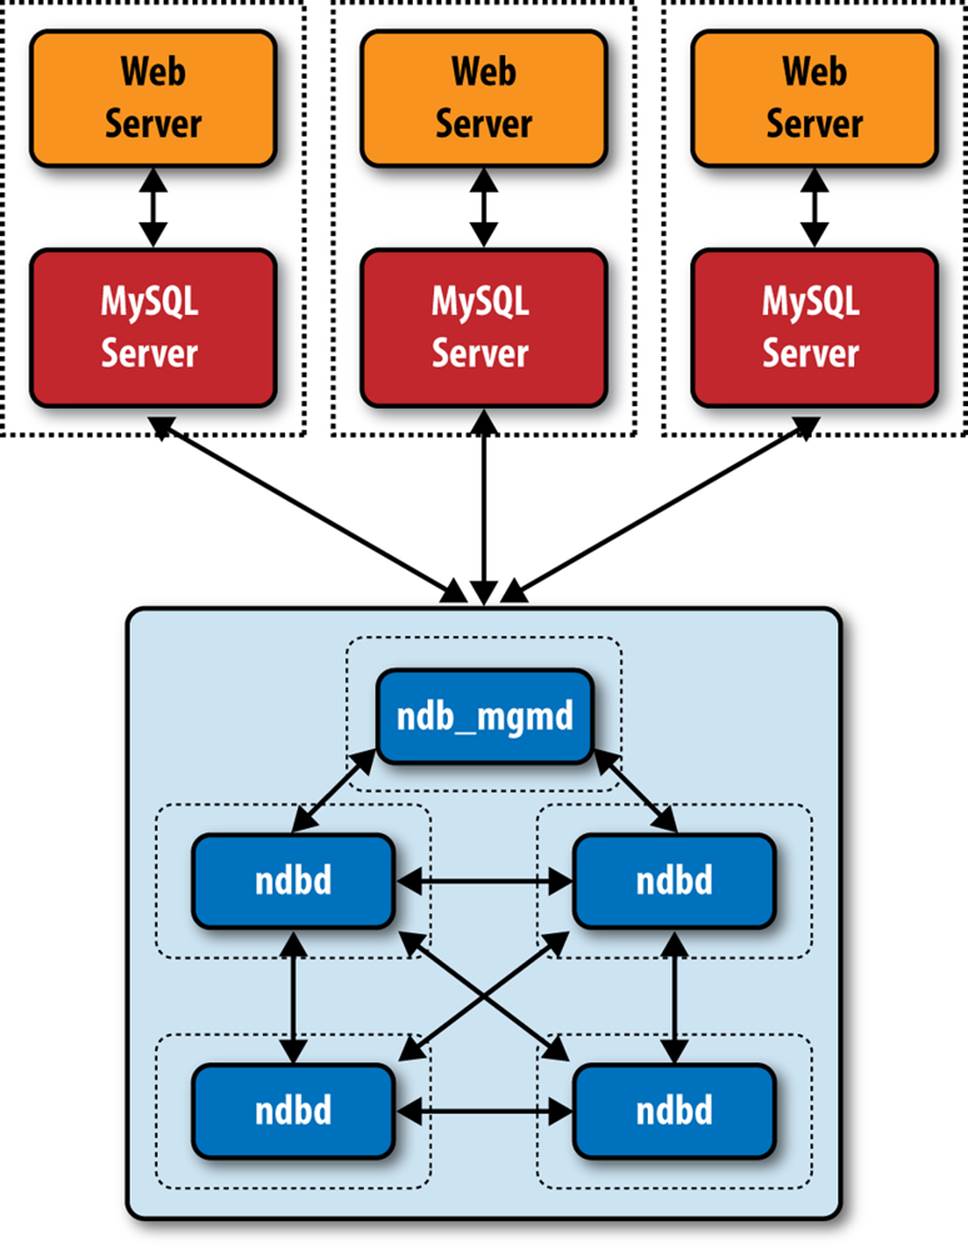 A highly available MySQL cluster